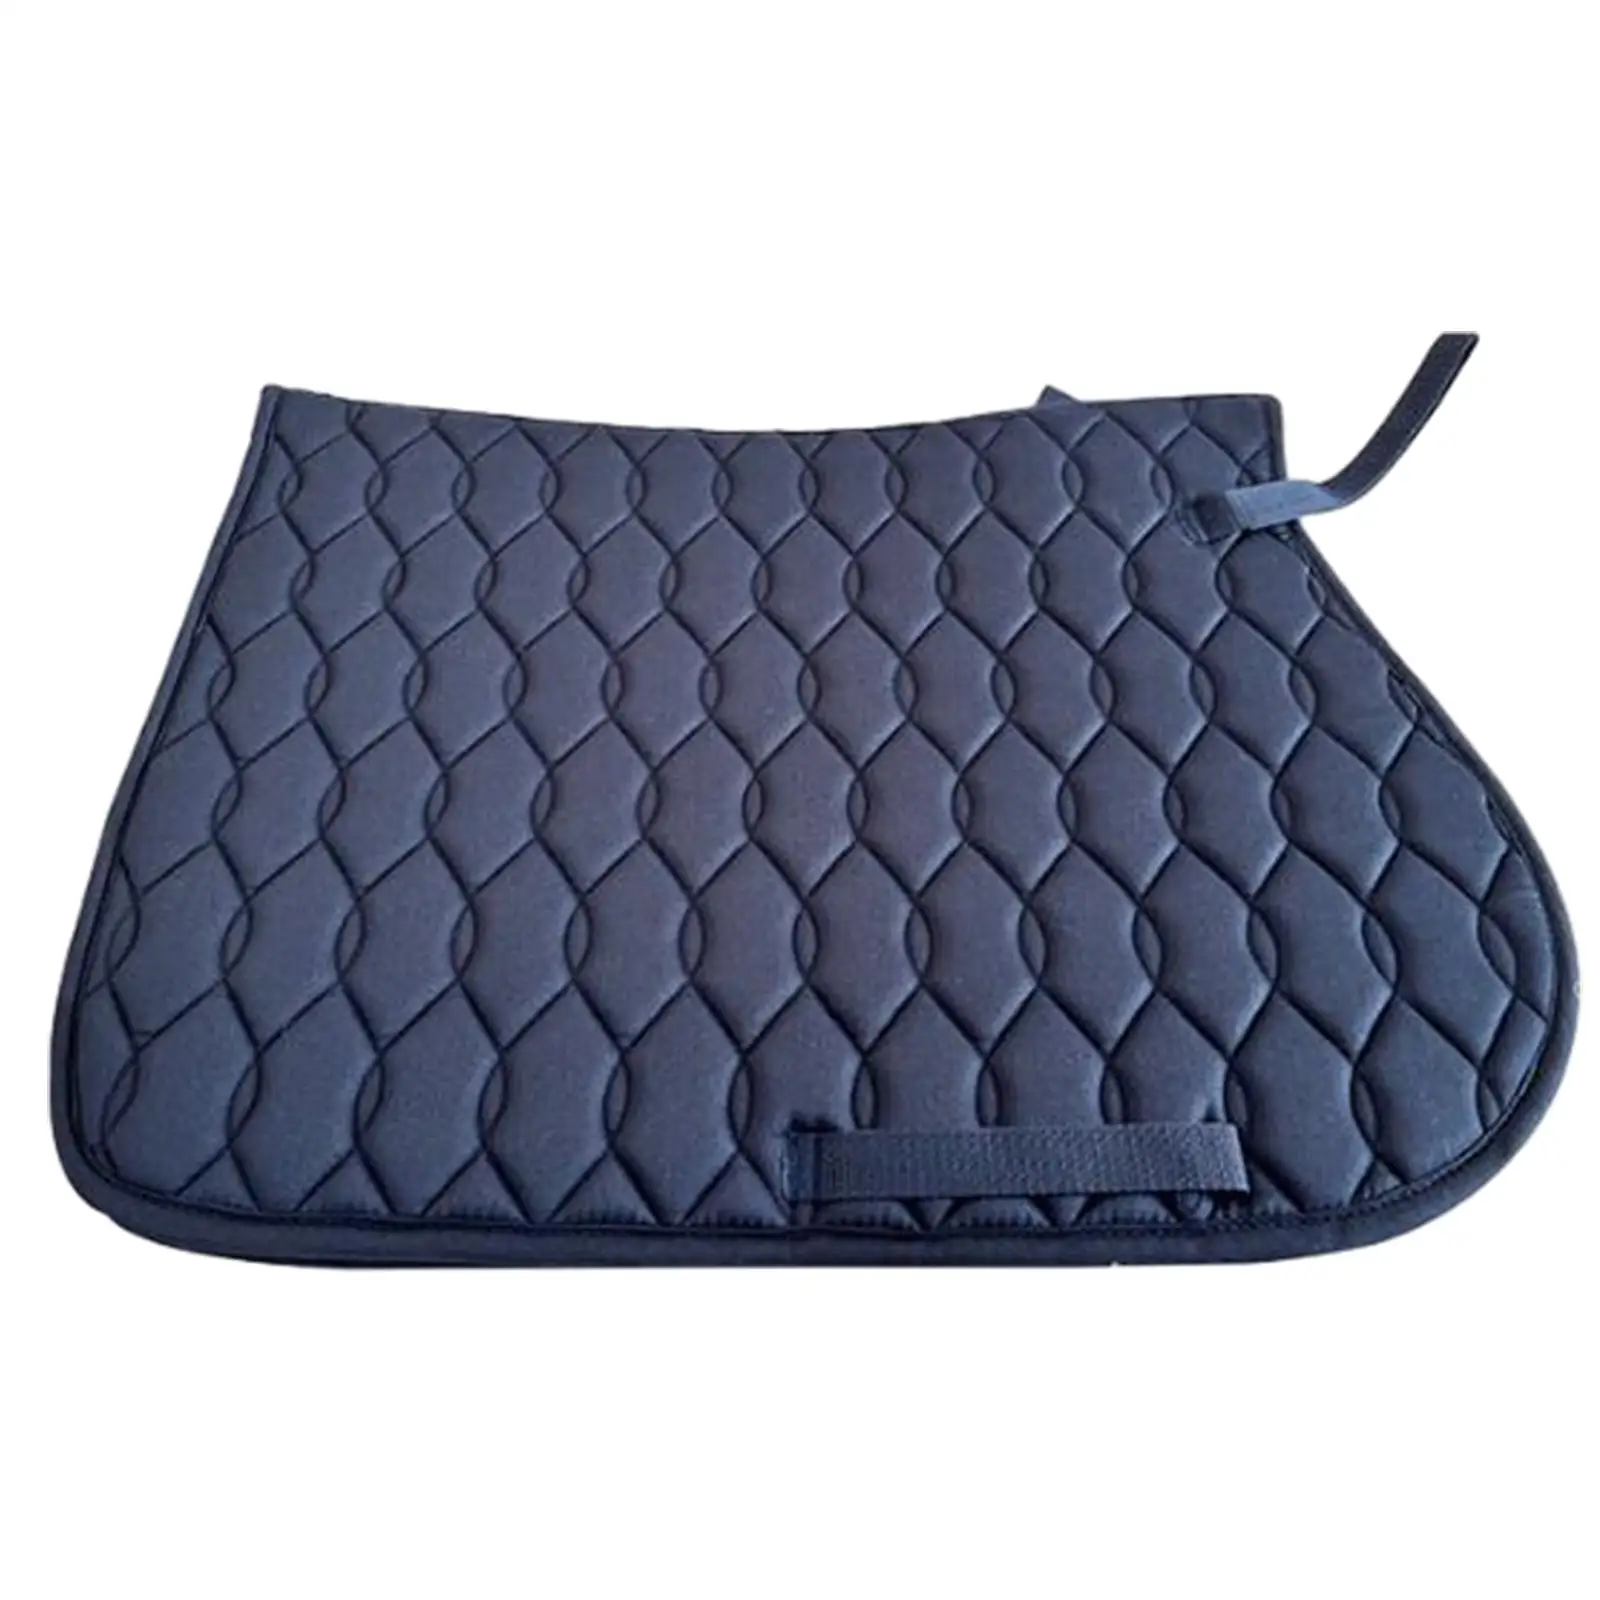 Horse Saddle Pad Equestrian Riding Equipment Protection 